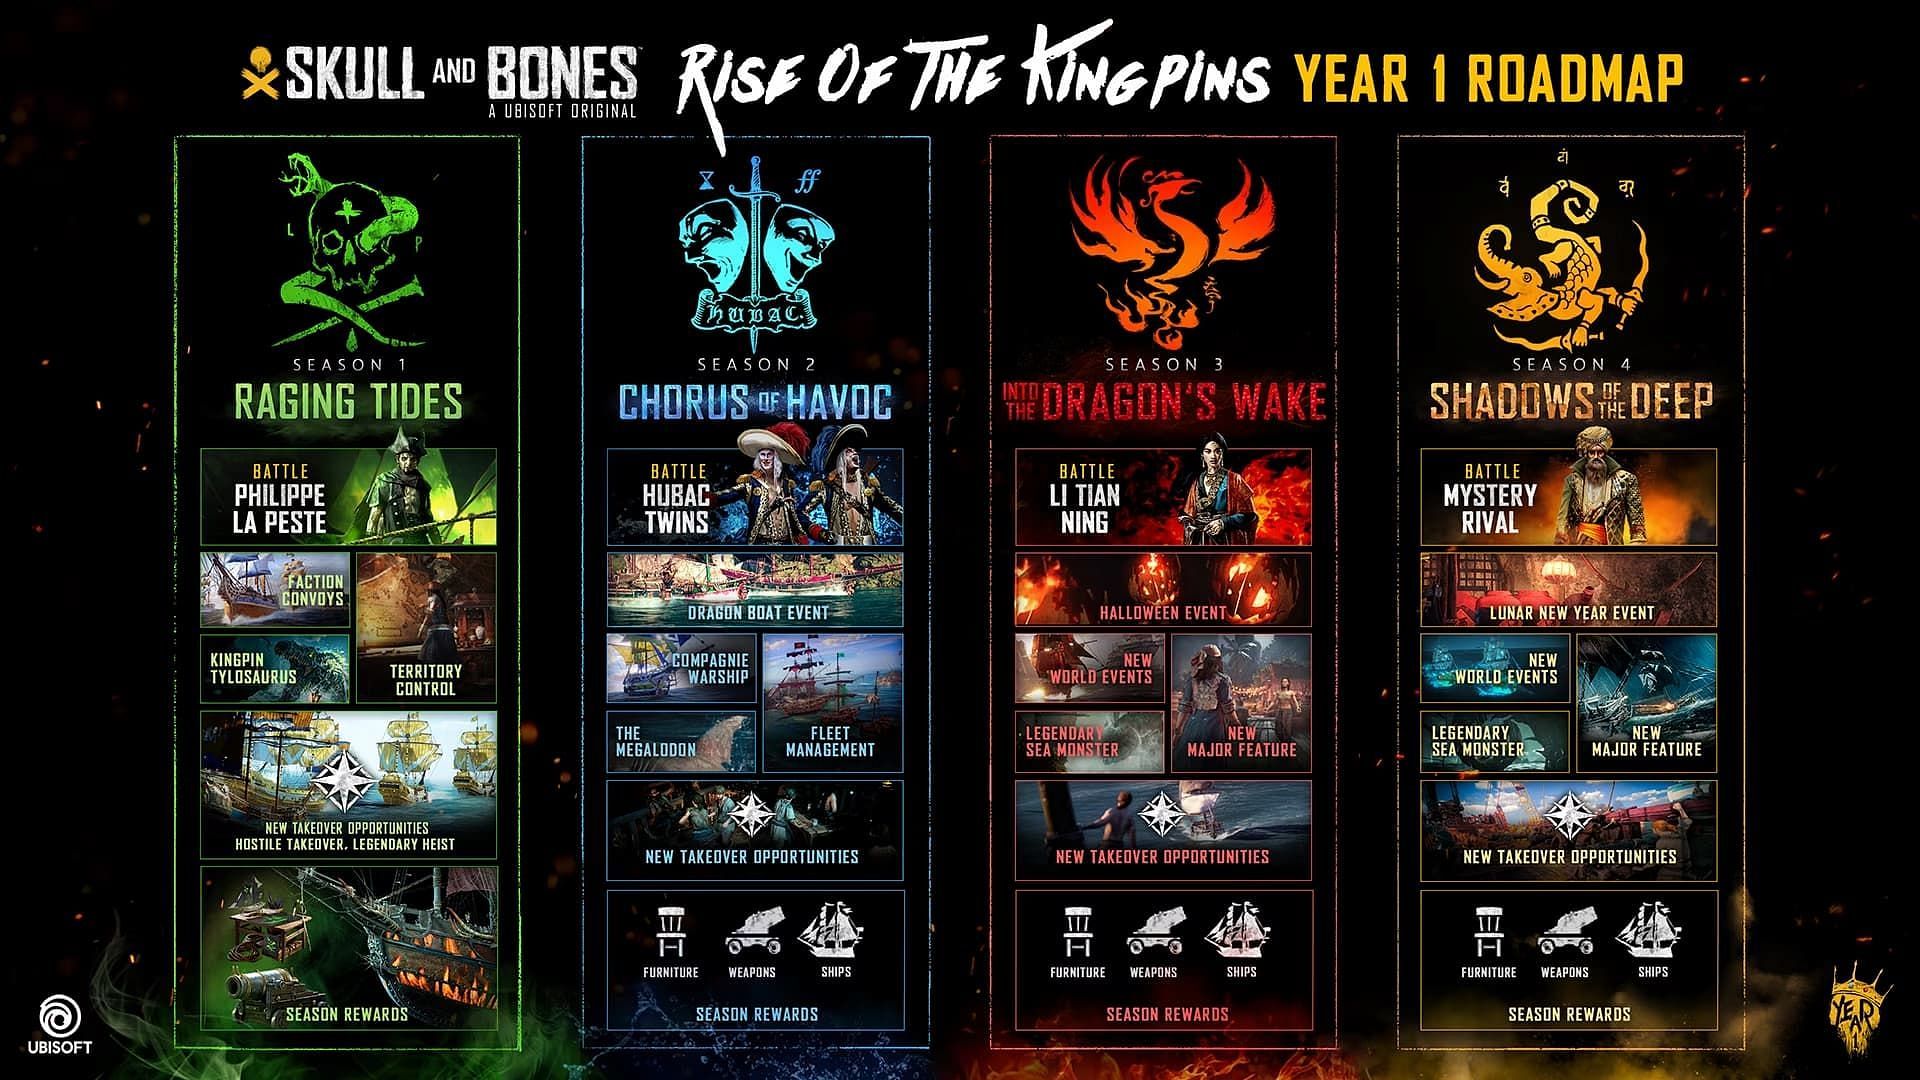 Official roadmap for Year 1 (Image via Ubisoft)